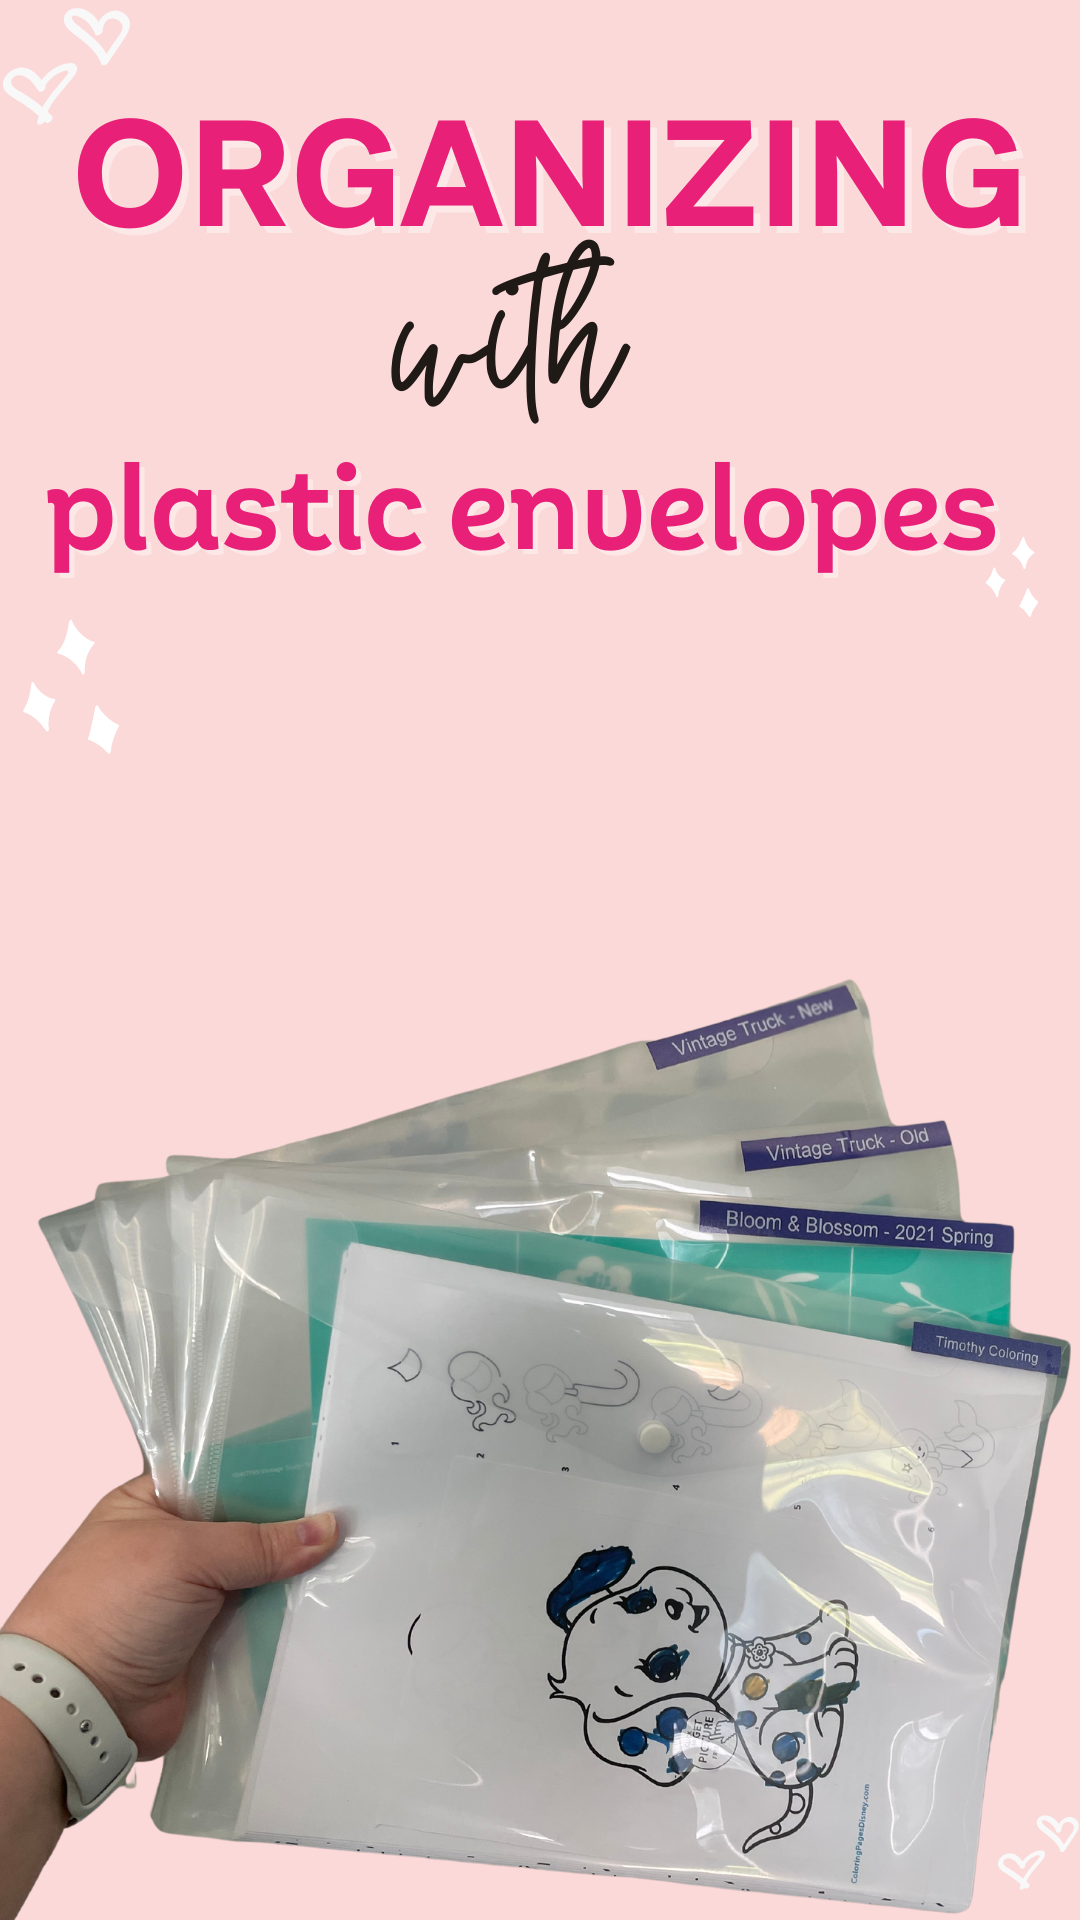 How to Organize with Plastic Envelopes